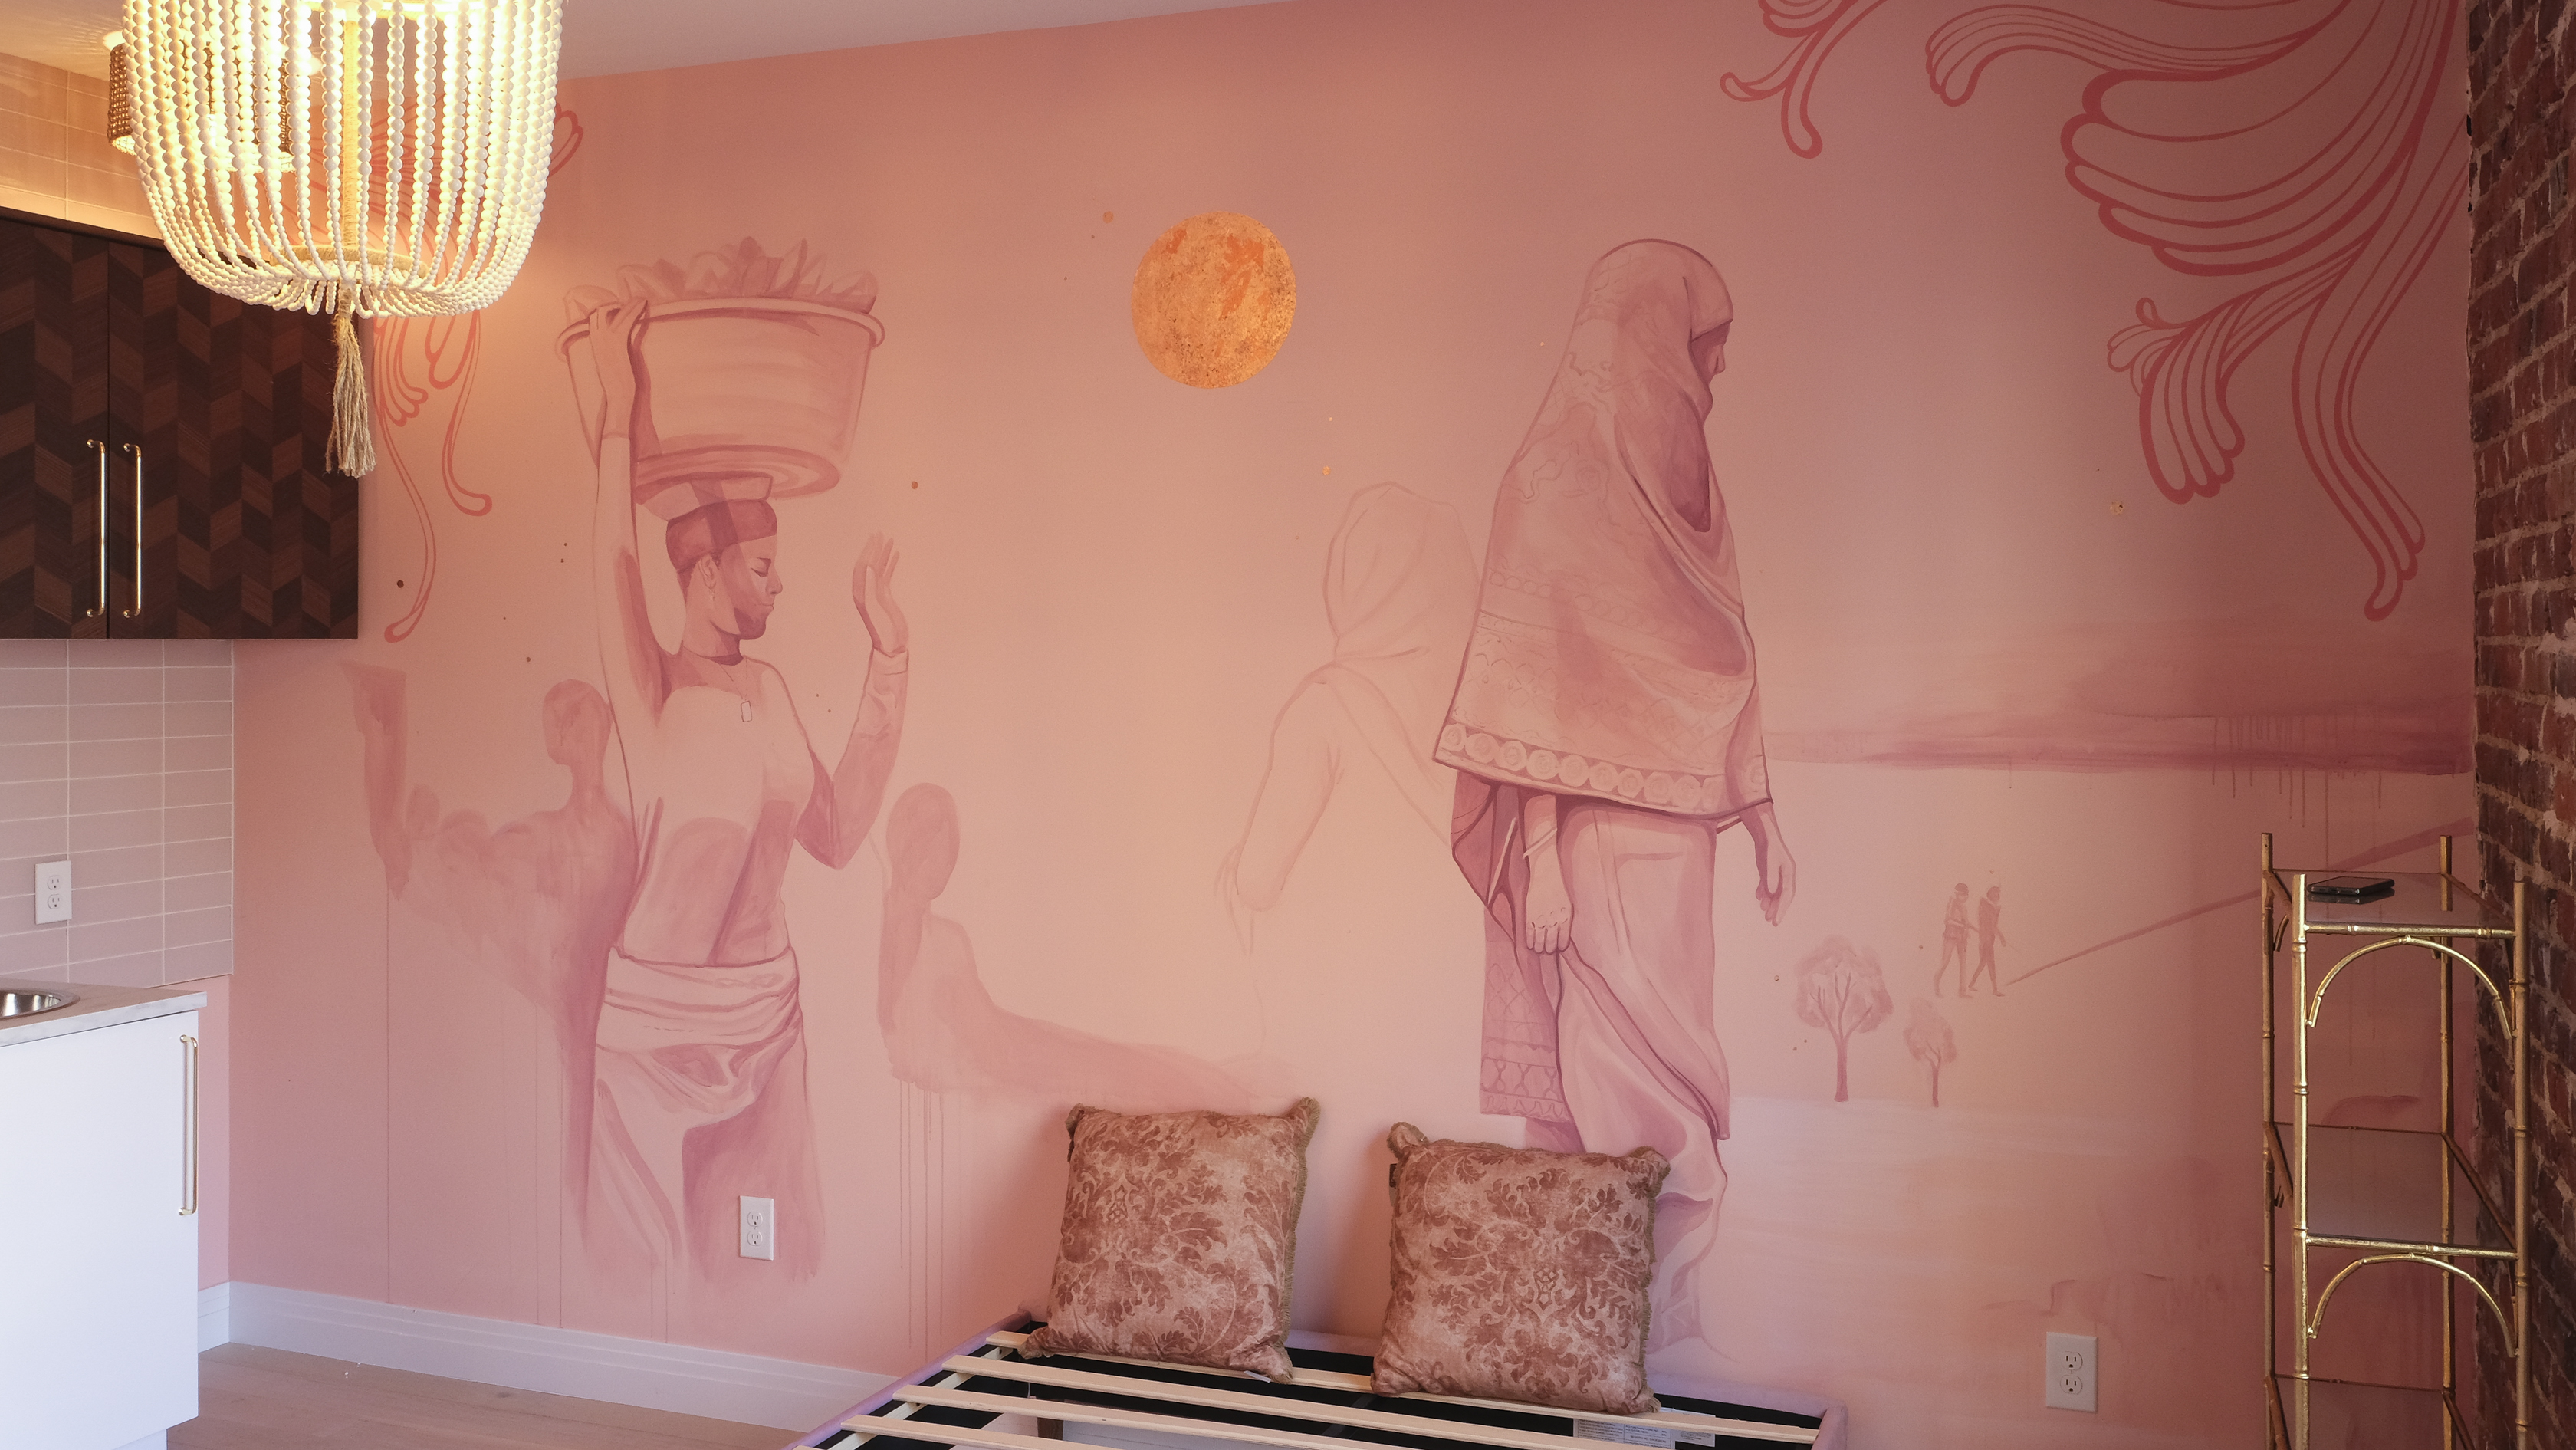 mural by Lindee Zimmer